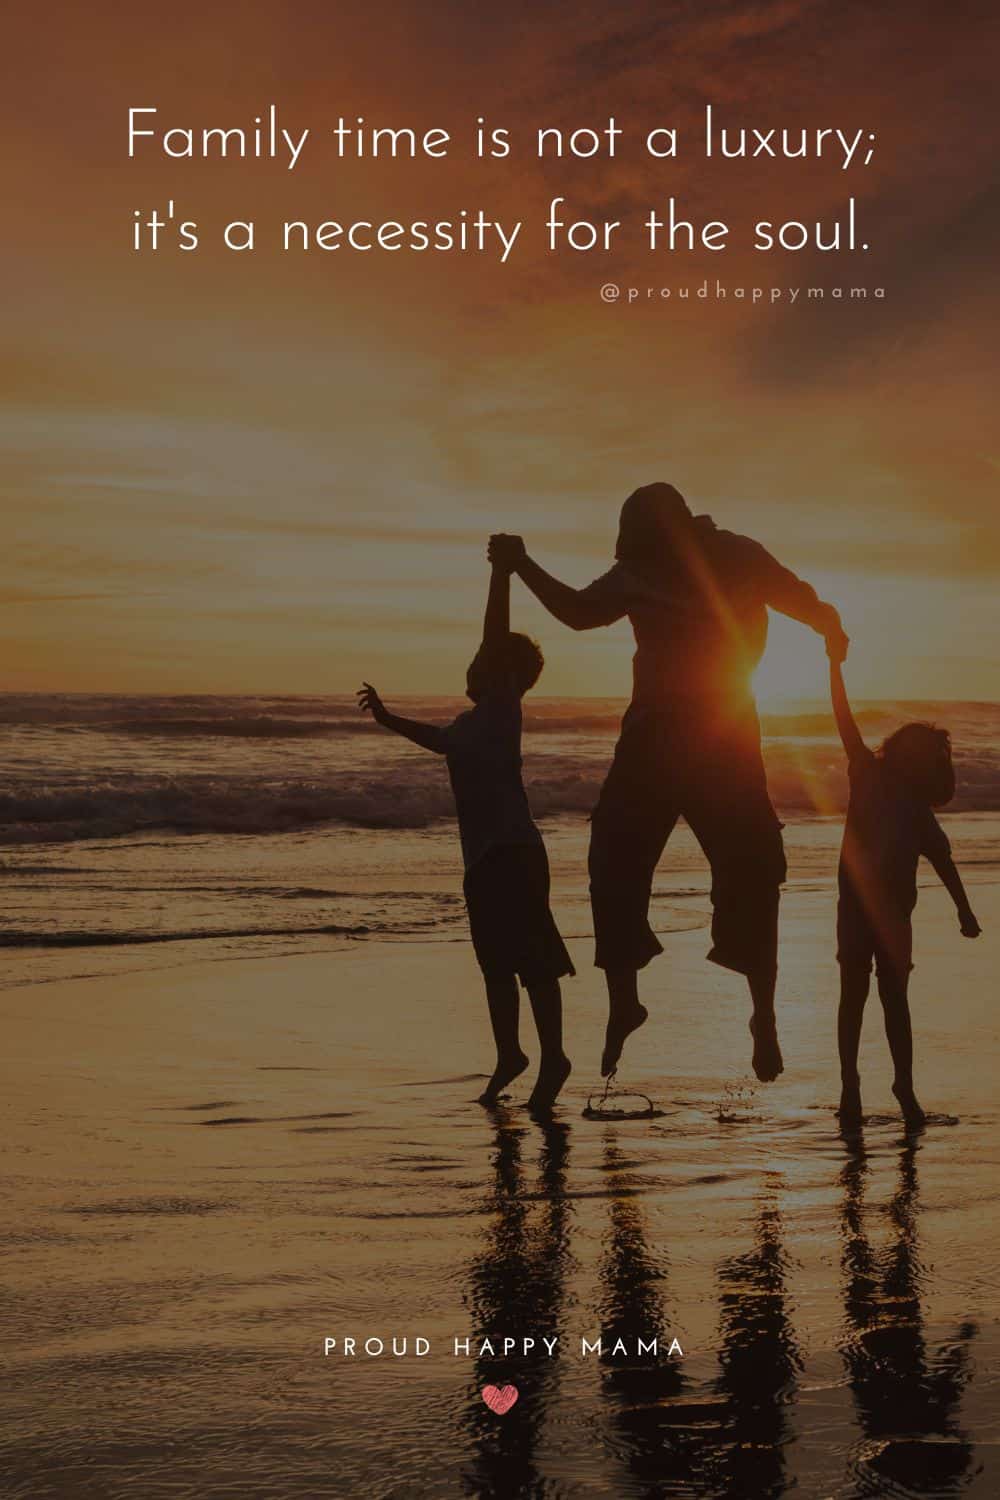 time with family quotes - Family time is not a luxury; it's a necessity for the soul.